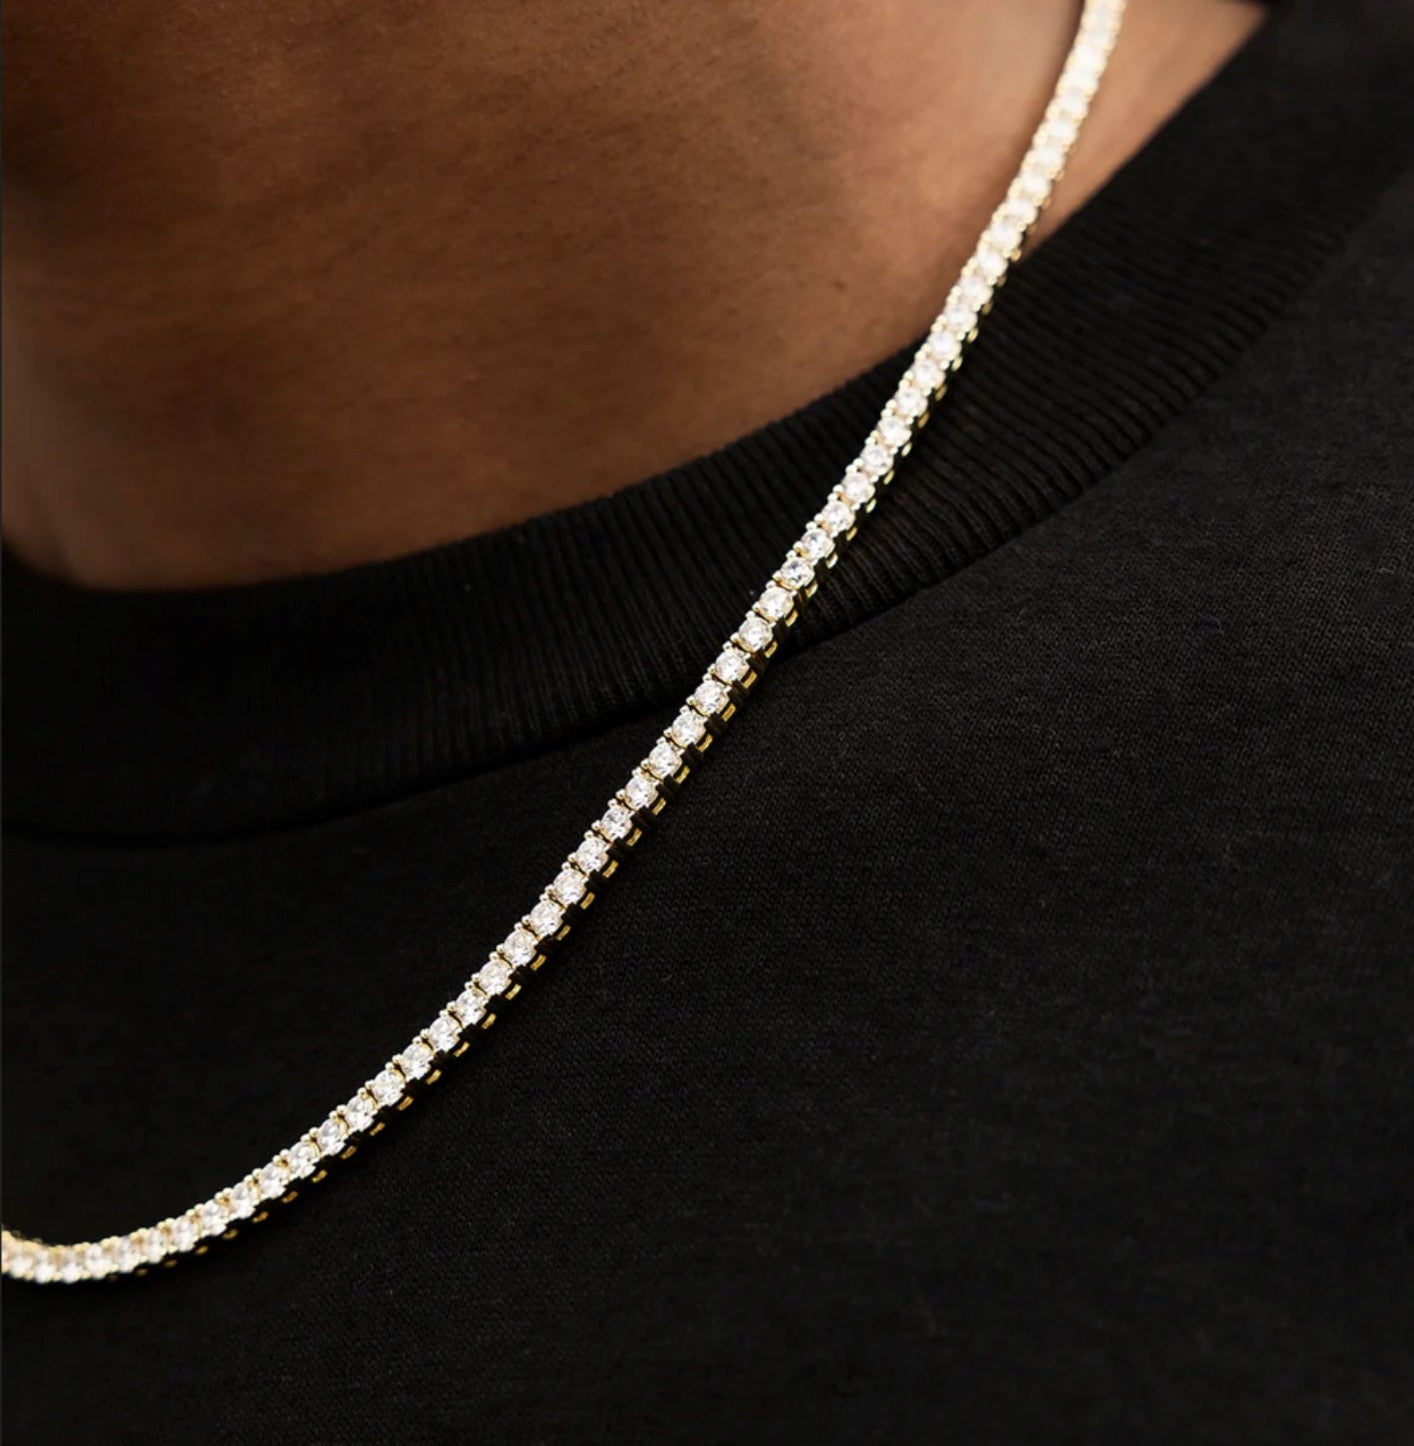 DIAMOND TENNIS NECKLACE - YELLOW GOLD 3 MM ring Yubama Jewelry Online Store - The Elegant Designs of Gold and Silver ! 